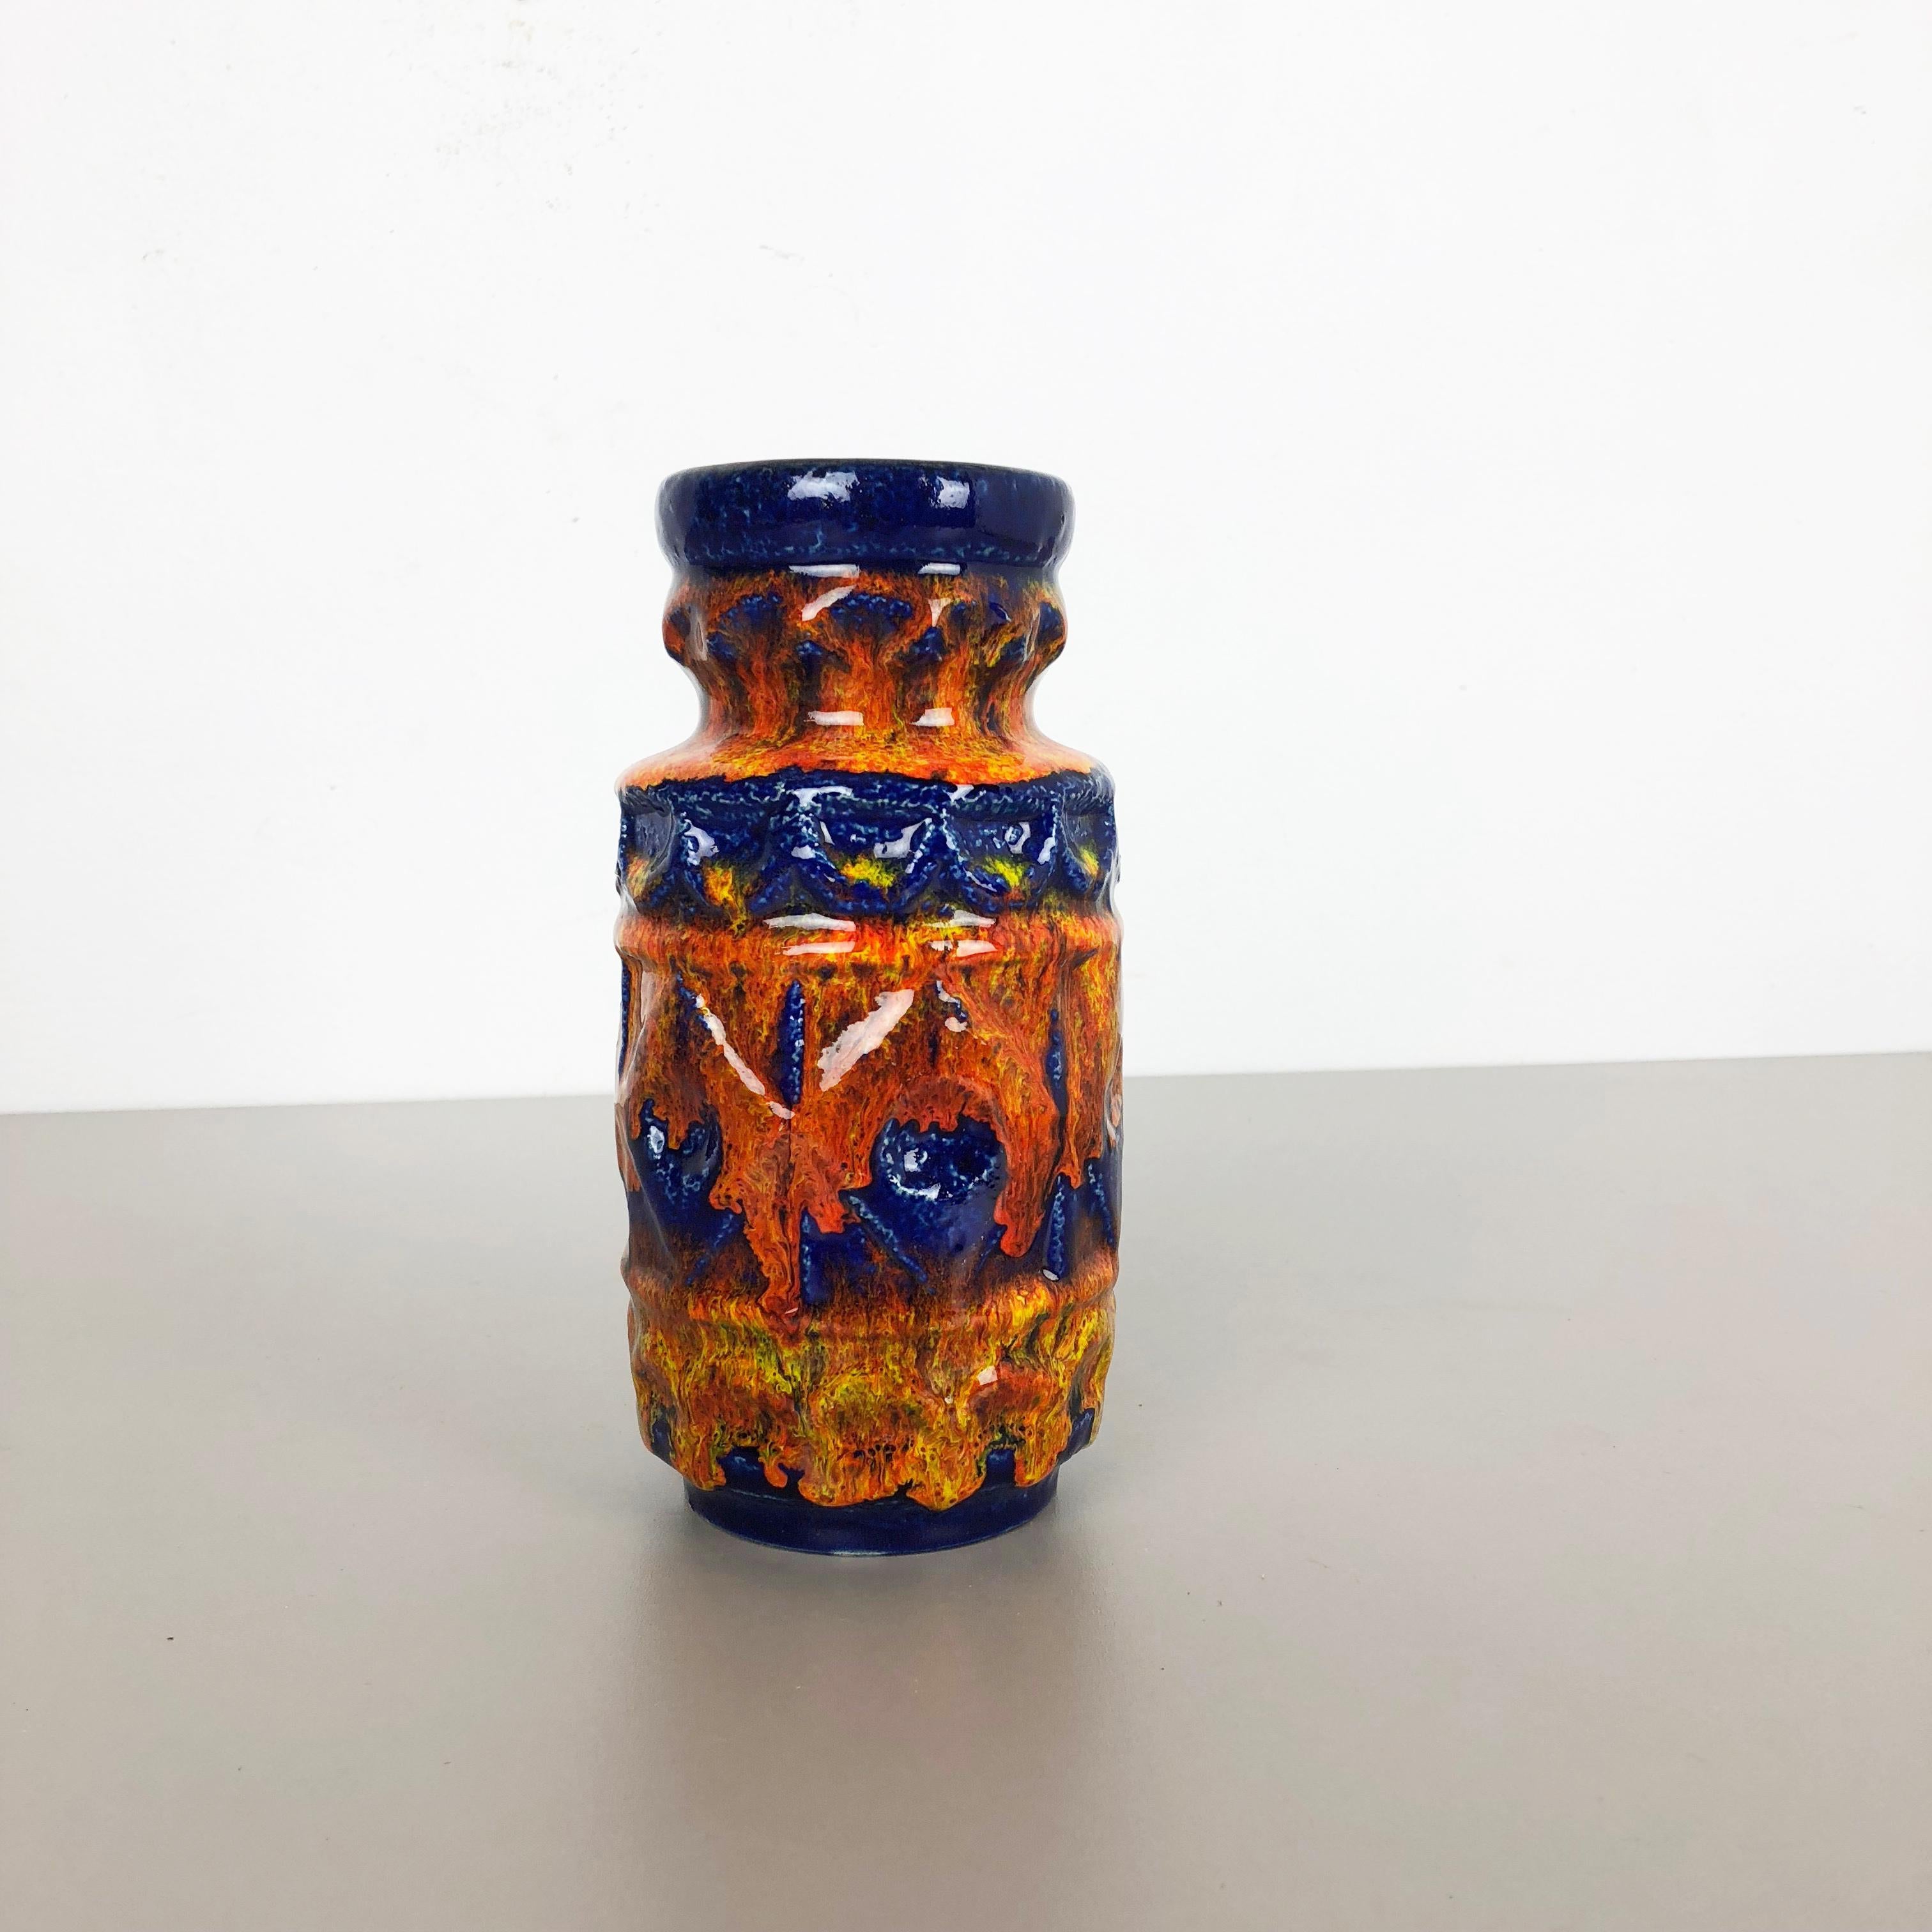 Article:

Pottery ceramic vase


Producer:

BAY Ceramic, Germany



Decade:

1960s



Description:

Original vintage 1960s pottery ceramic vase made in Germany. High quality German production with a nice abstract painting and